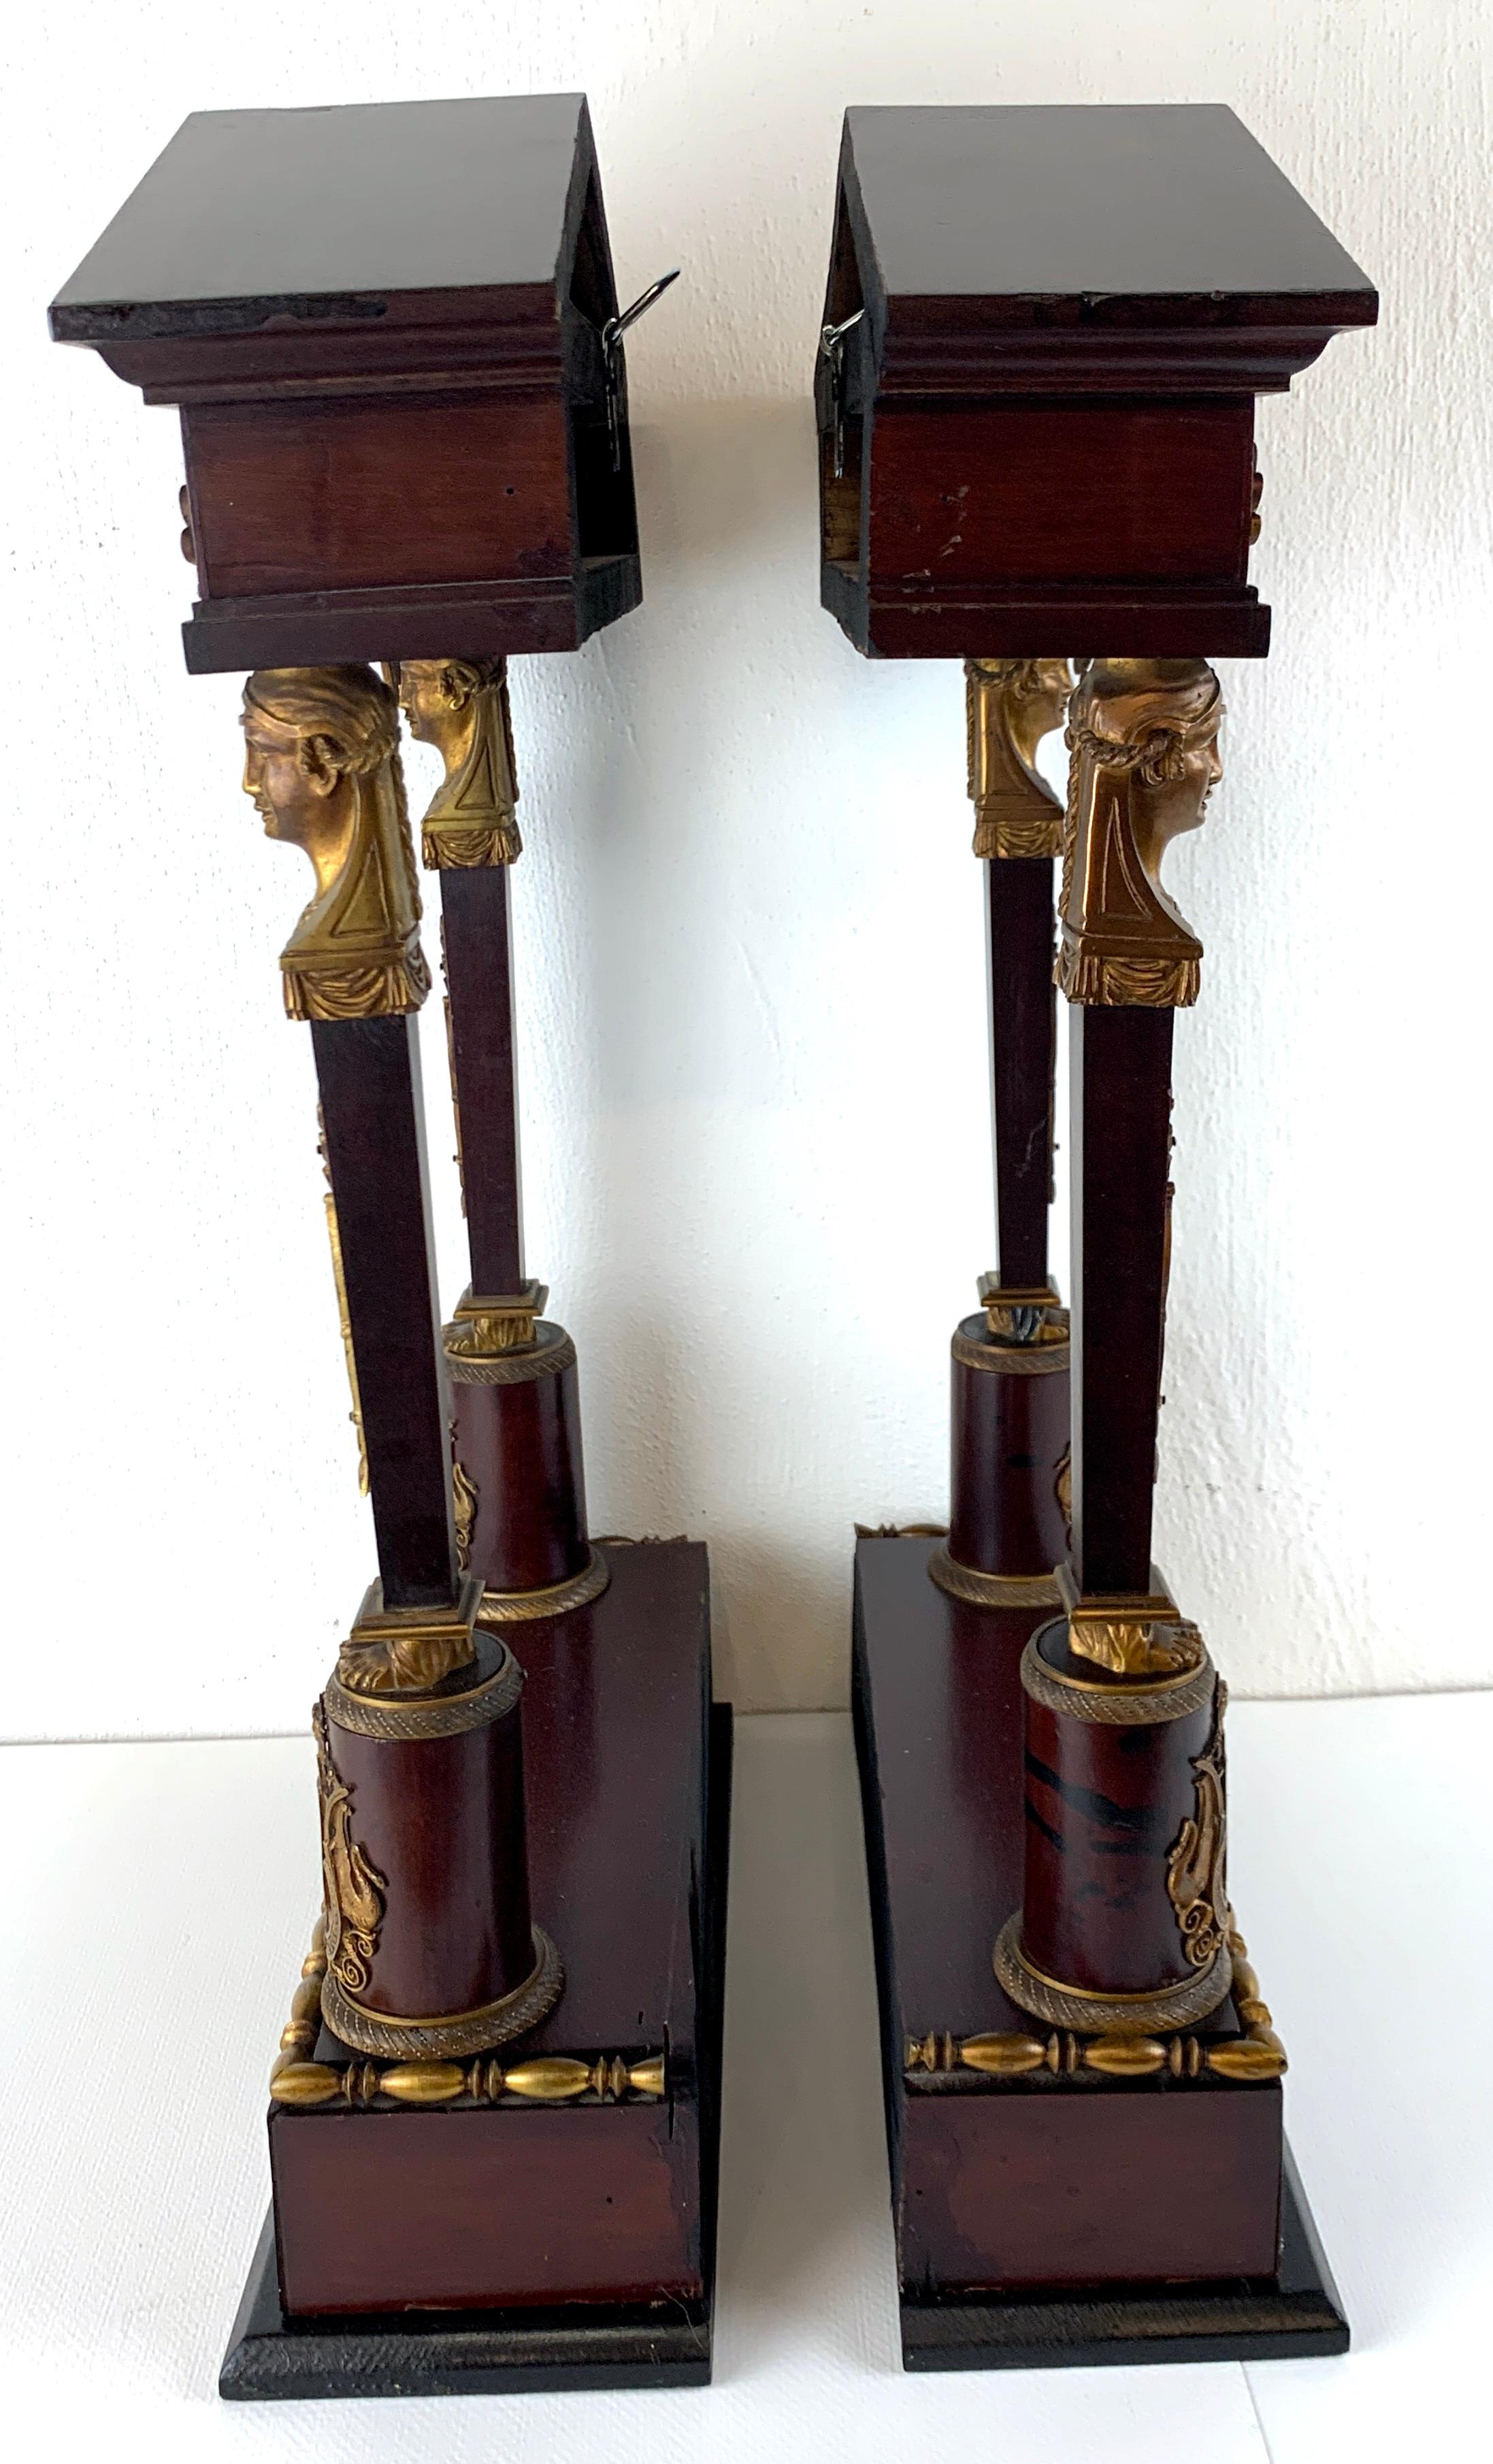 Pair of Second Empire Caryatid Wall Ormolu Mounted Wall Shelves In Good Condition For Sale In Atlanta, GA